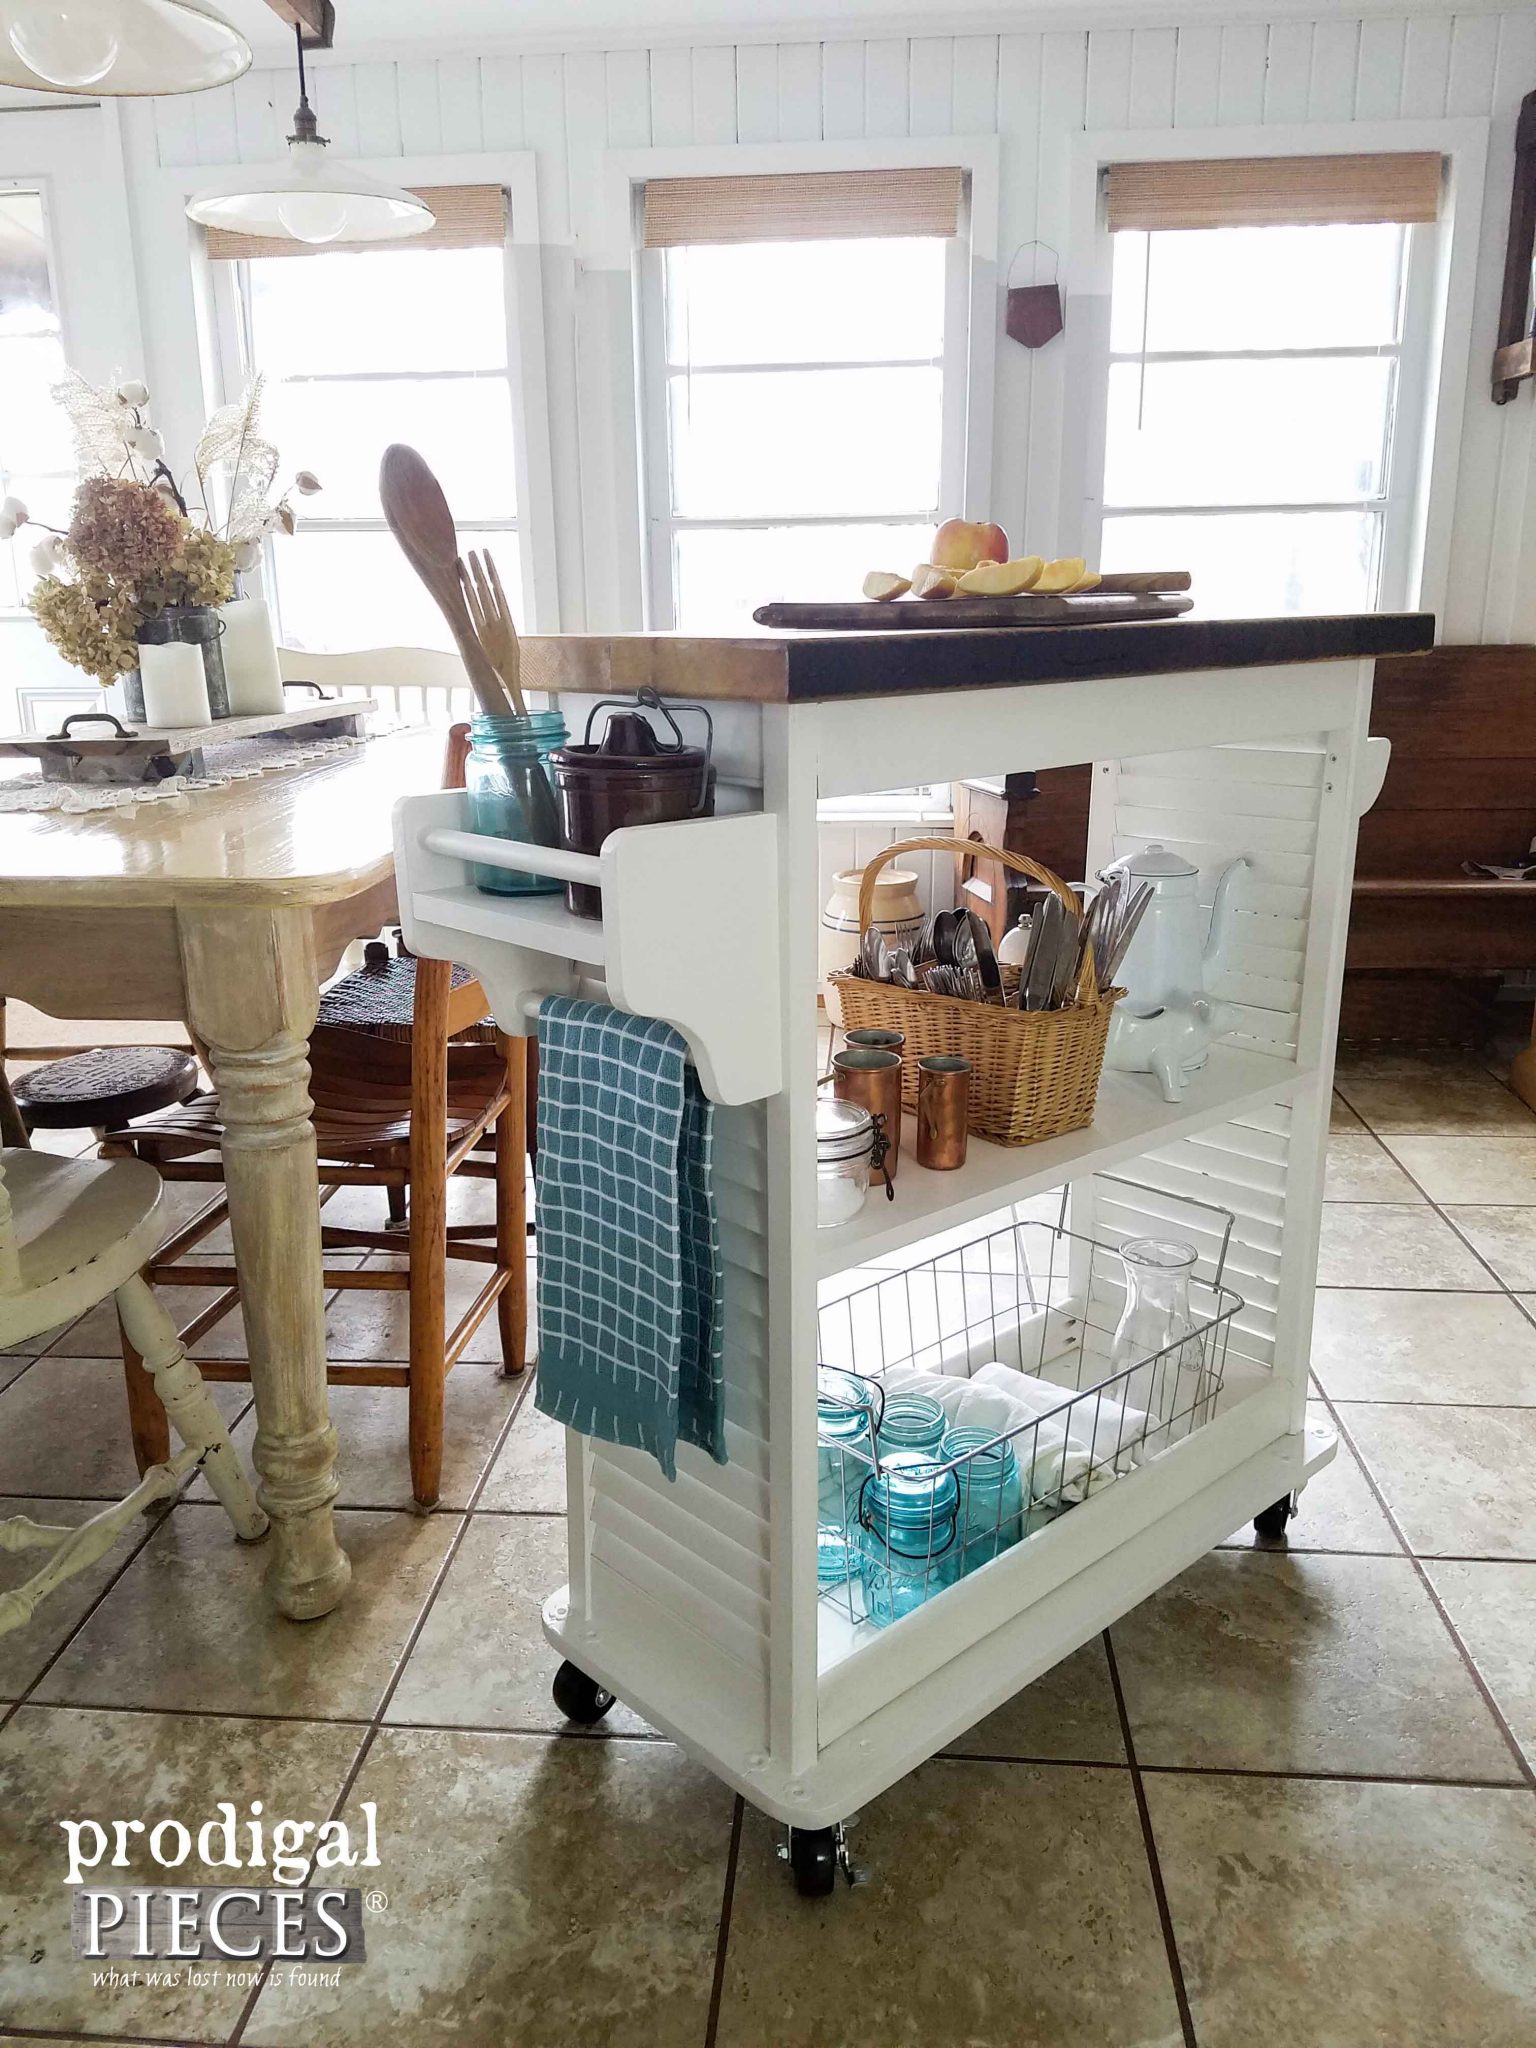 Kitchen Island Cart with Accessory Holders ~ Upcycled Fun by Prodigal Pieces | prodigalpieces.com